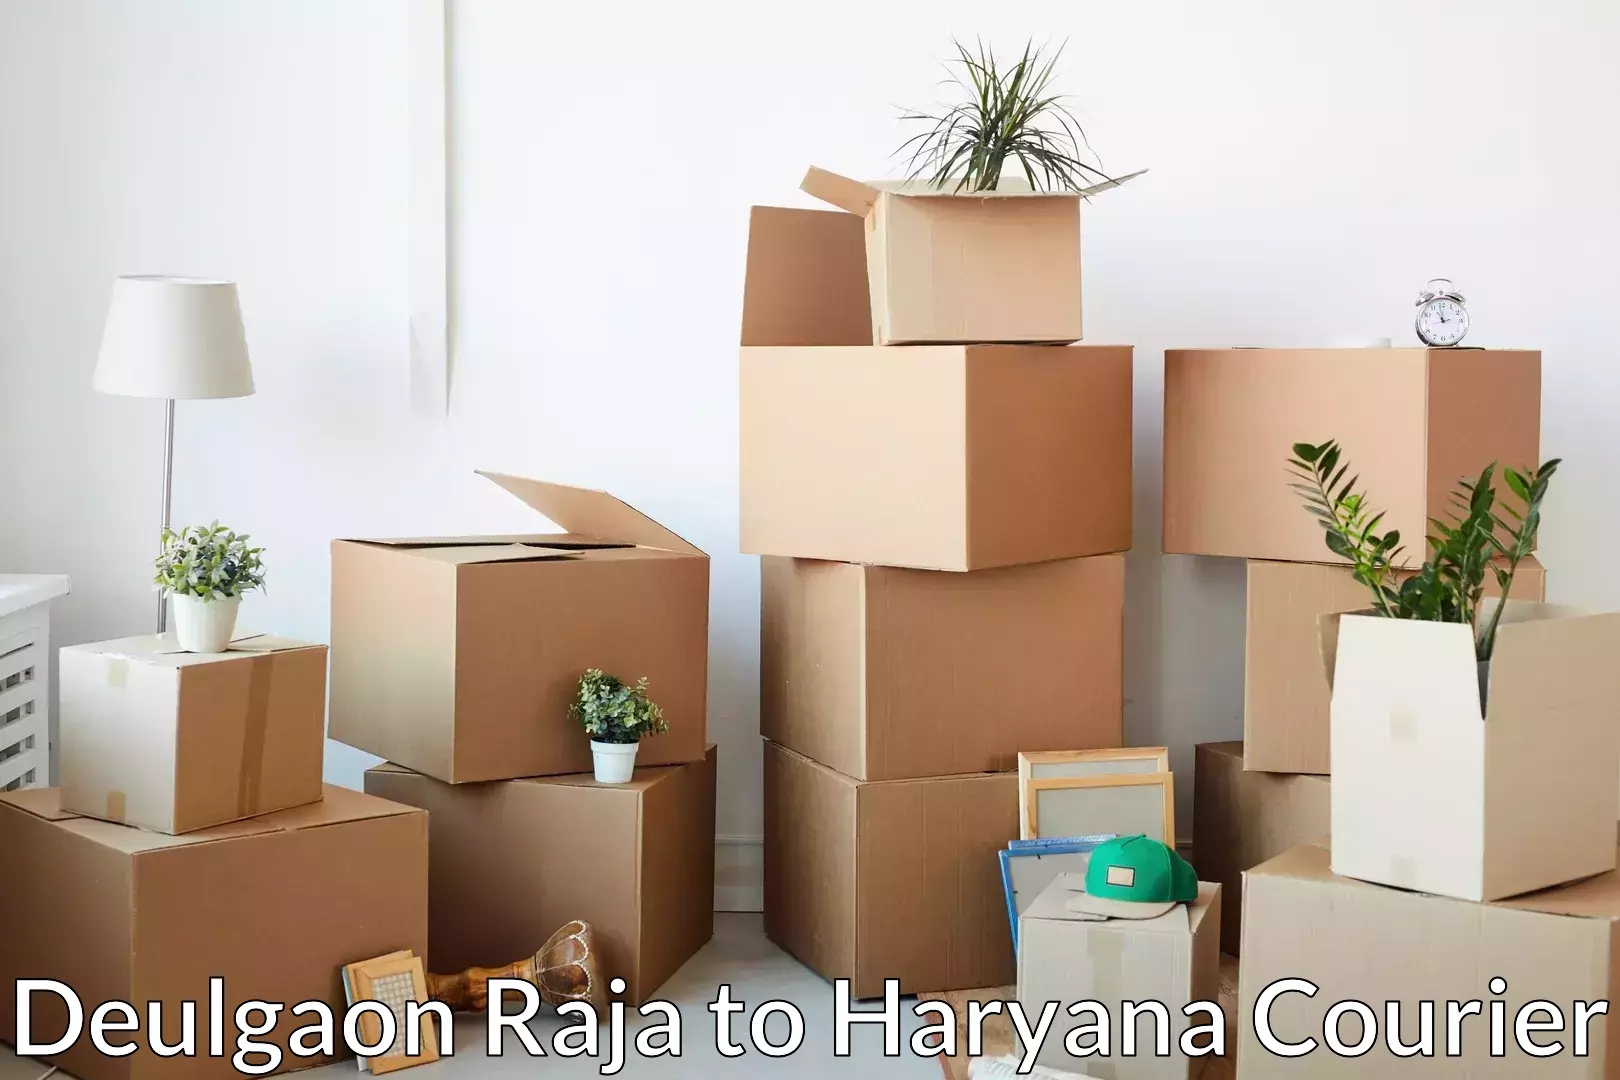 Professional home movers Deulgaon Raja to Assandh